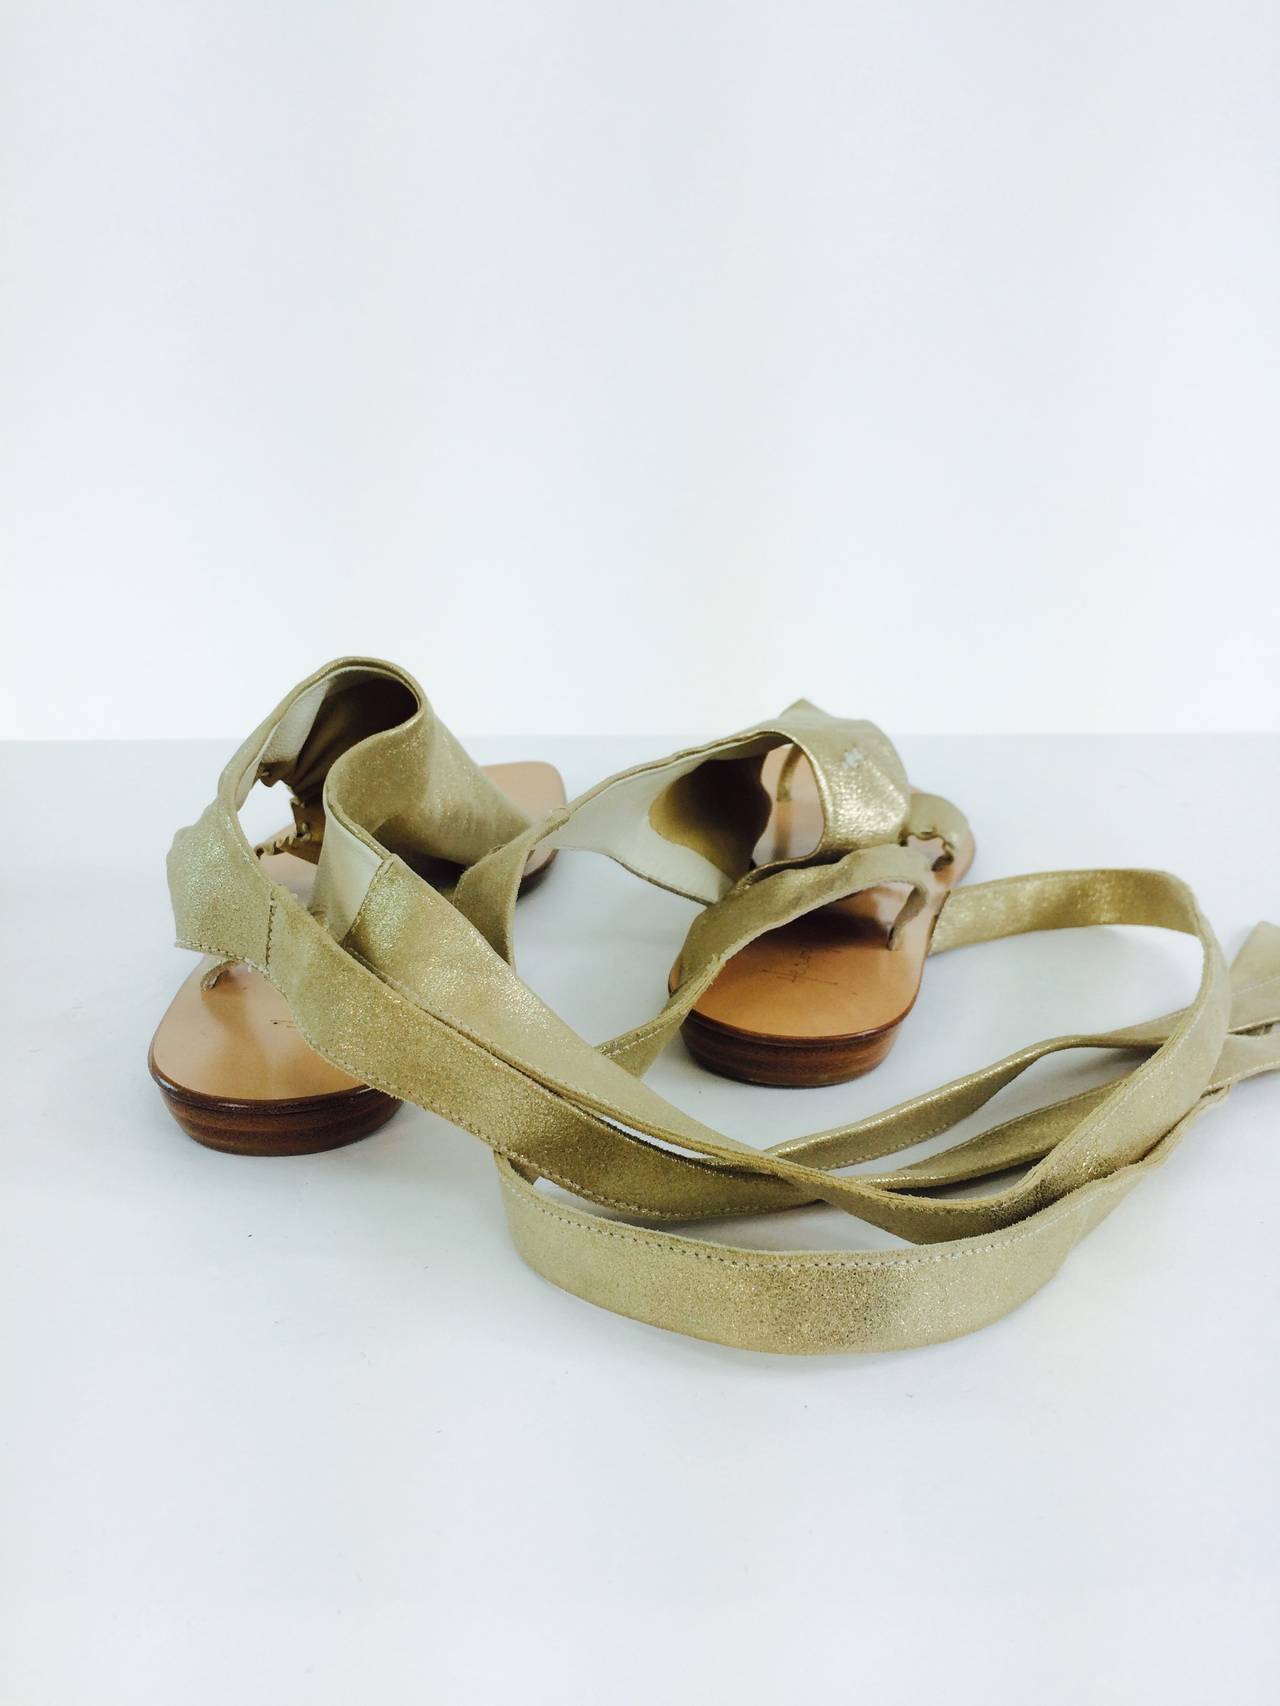 Women's Henry Beguelin gold soft leather ankle wrap thong sandals 38